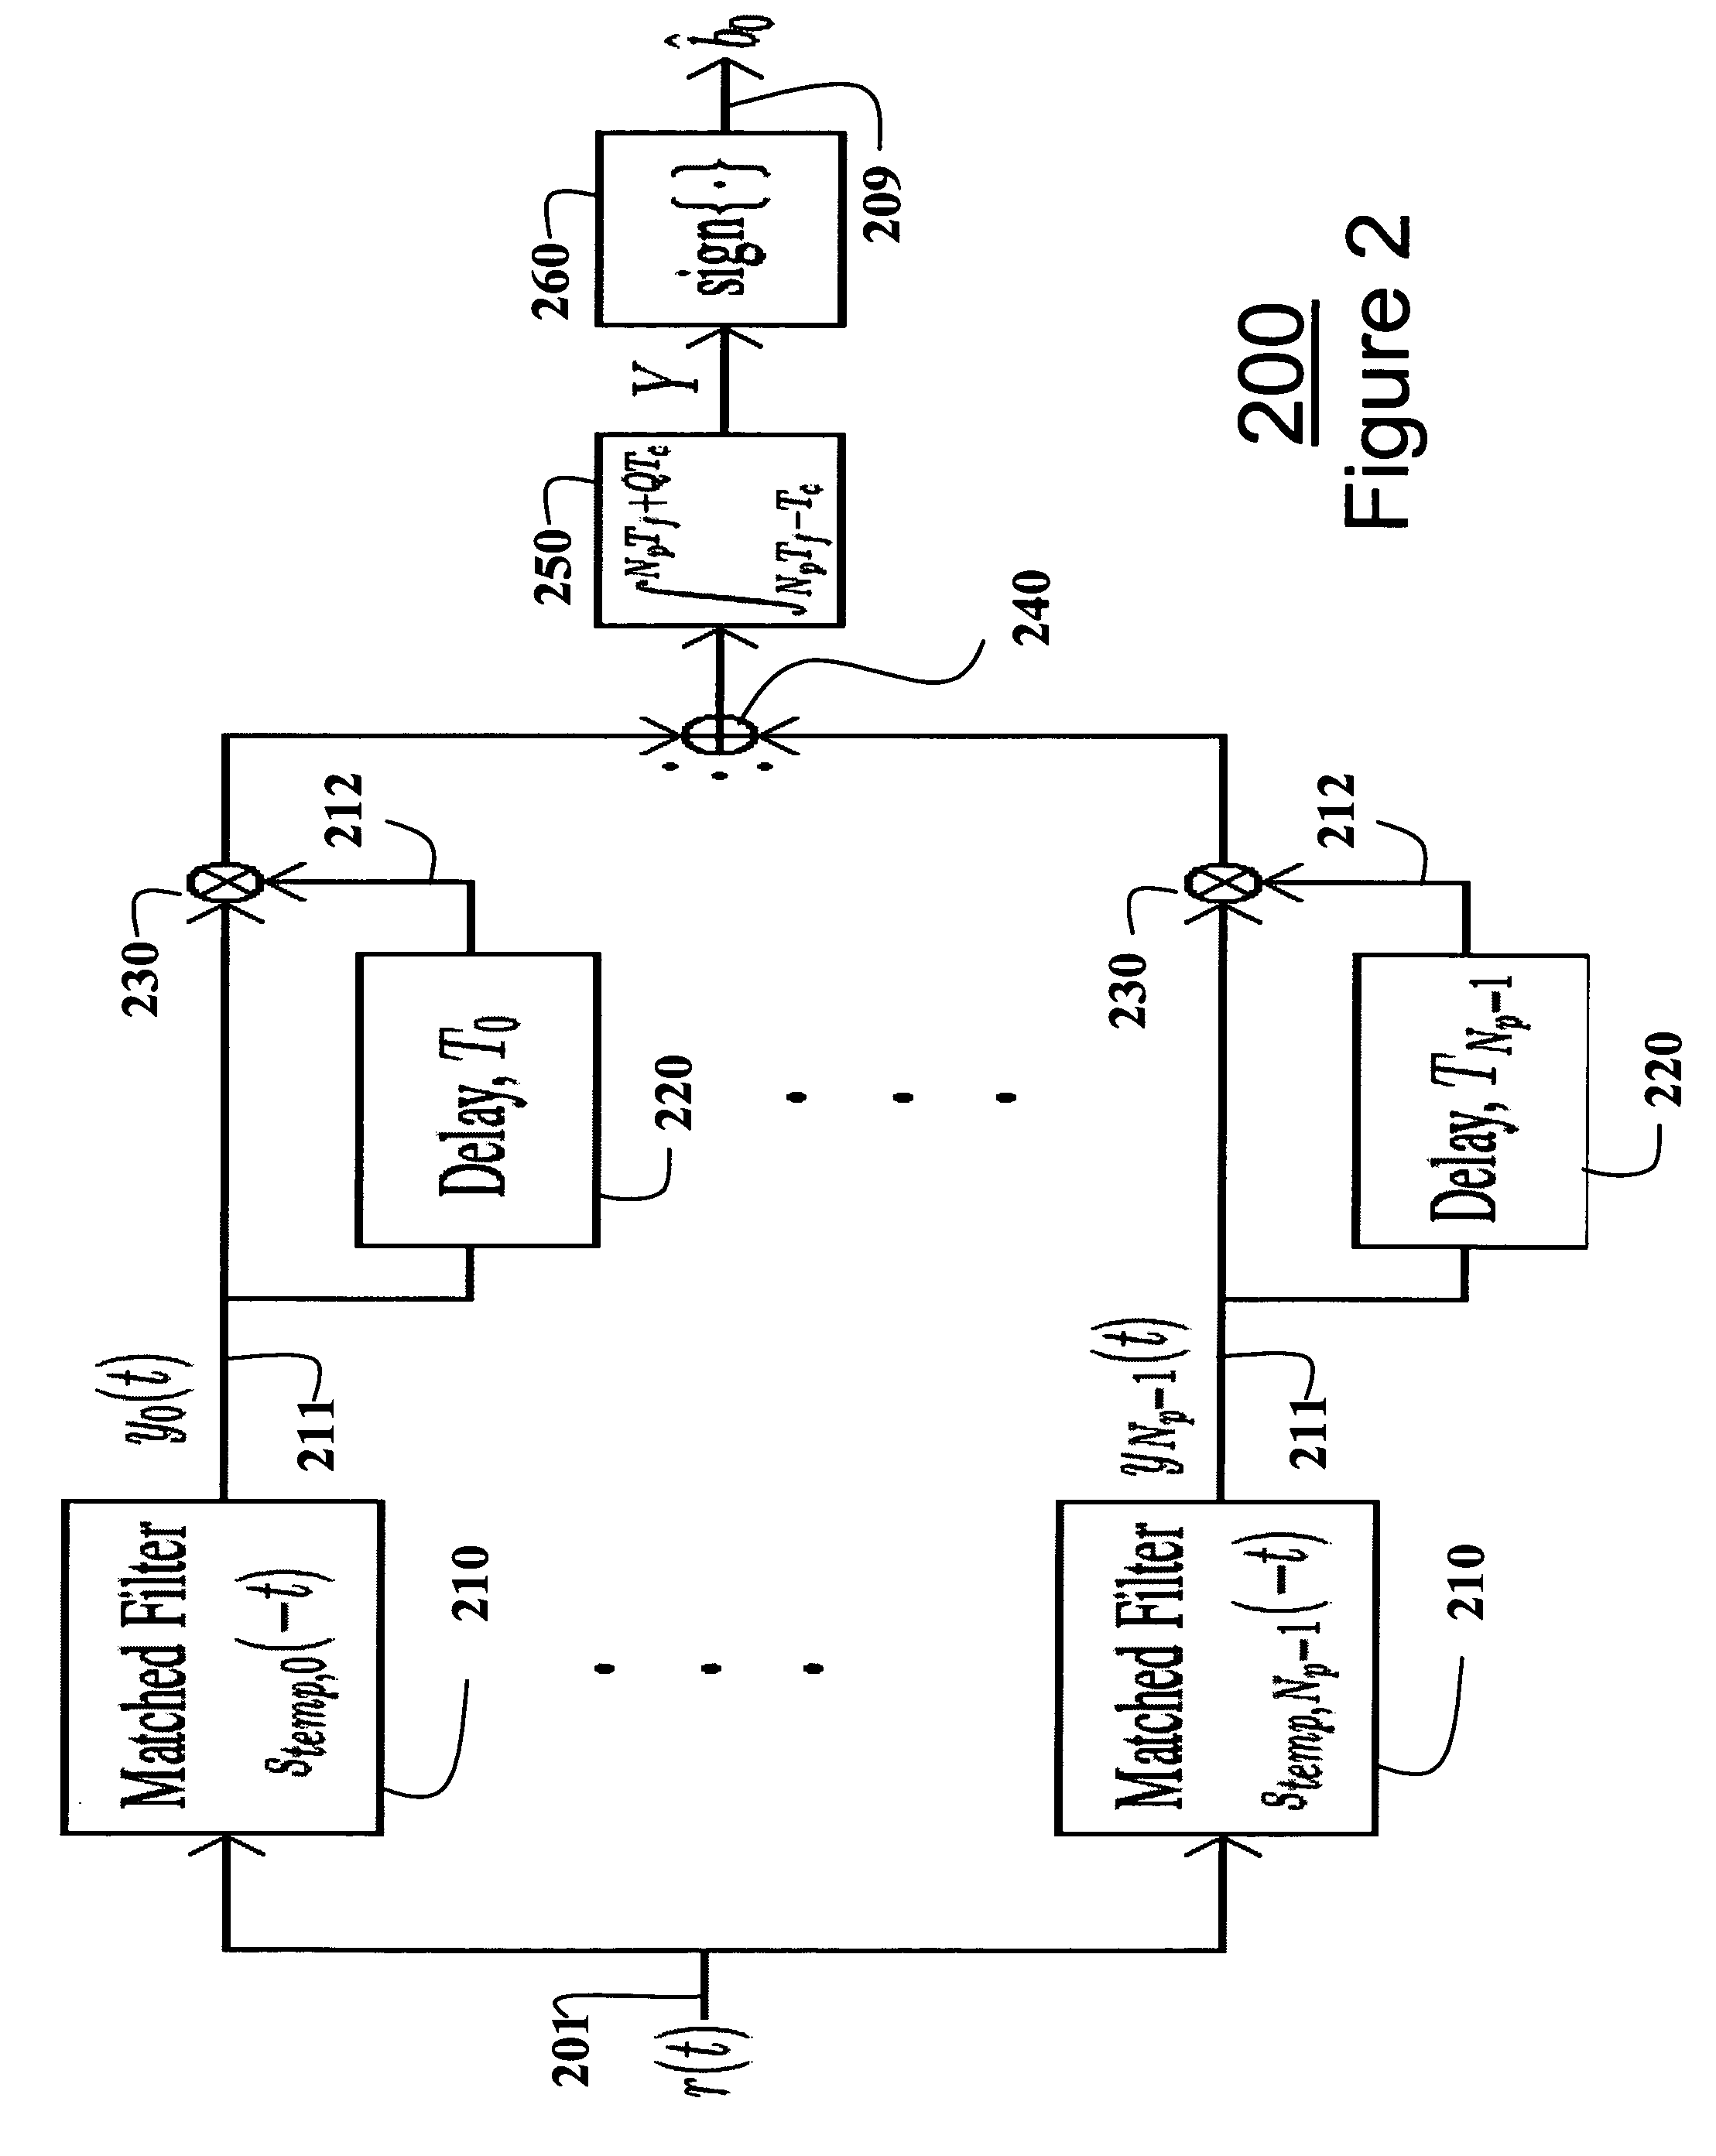 Impulse radio systems with multiple pulse types